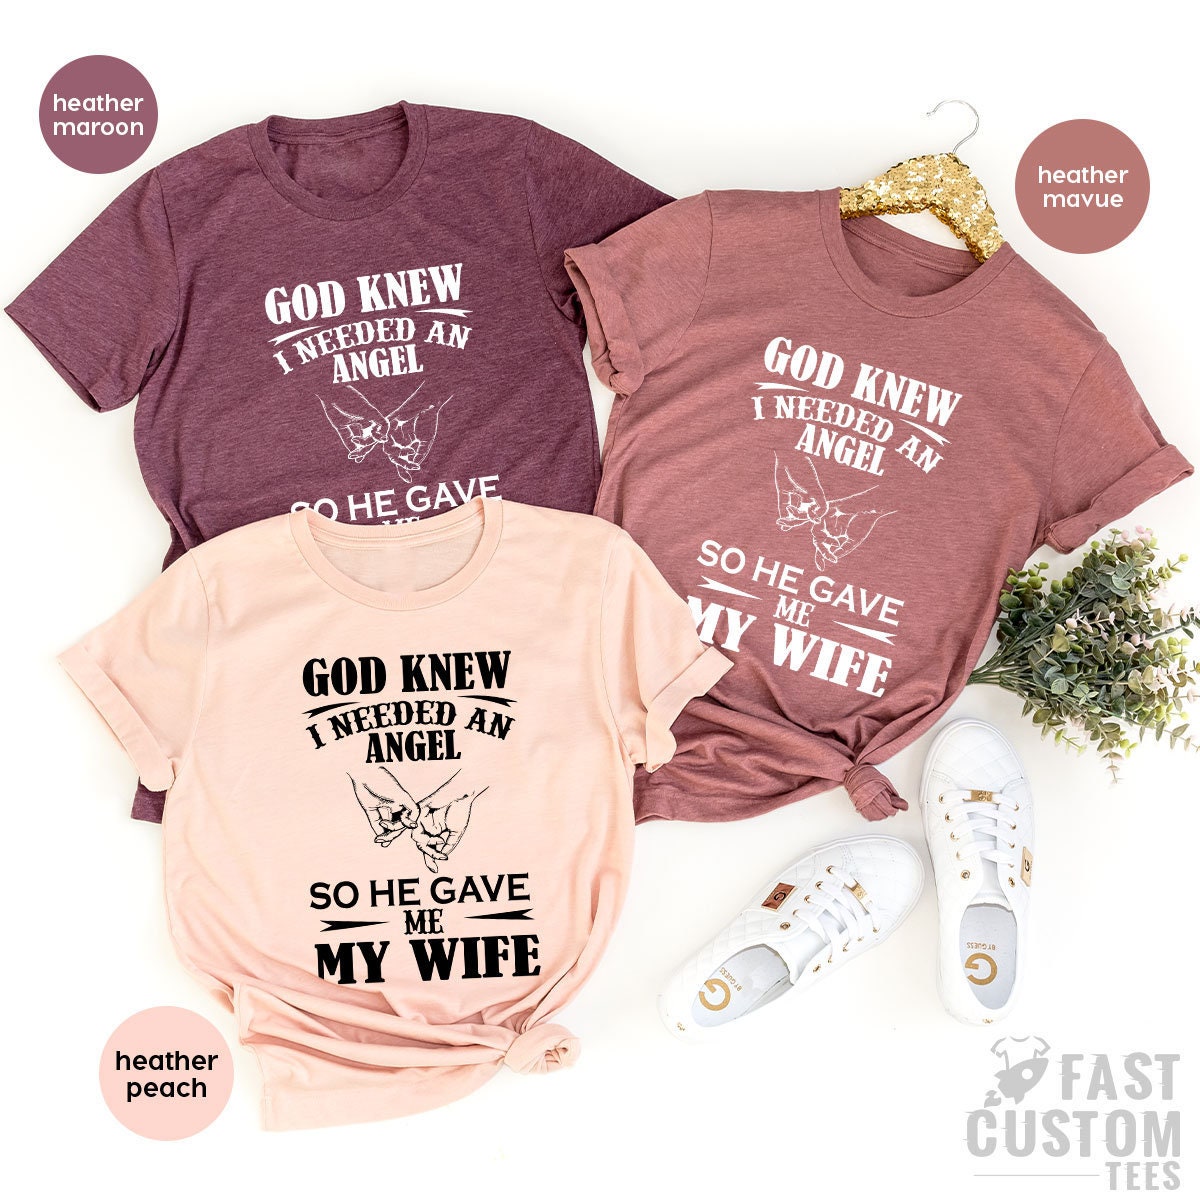 Wife Shirt, Gift For Wife, Anniversary Gift, Newlywed Gift, Wedding Gift, Shirt For Wife, Just Married Shirt, New Wife Shirt - Fastdeliverytees.com